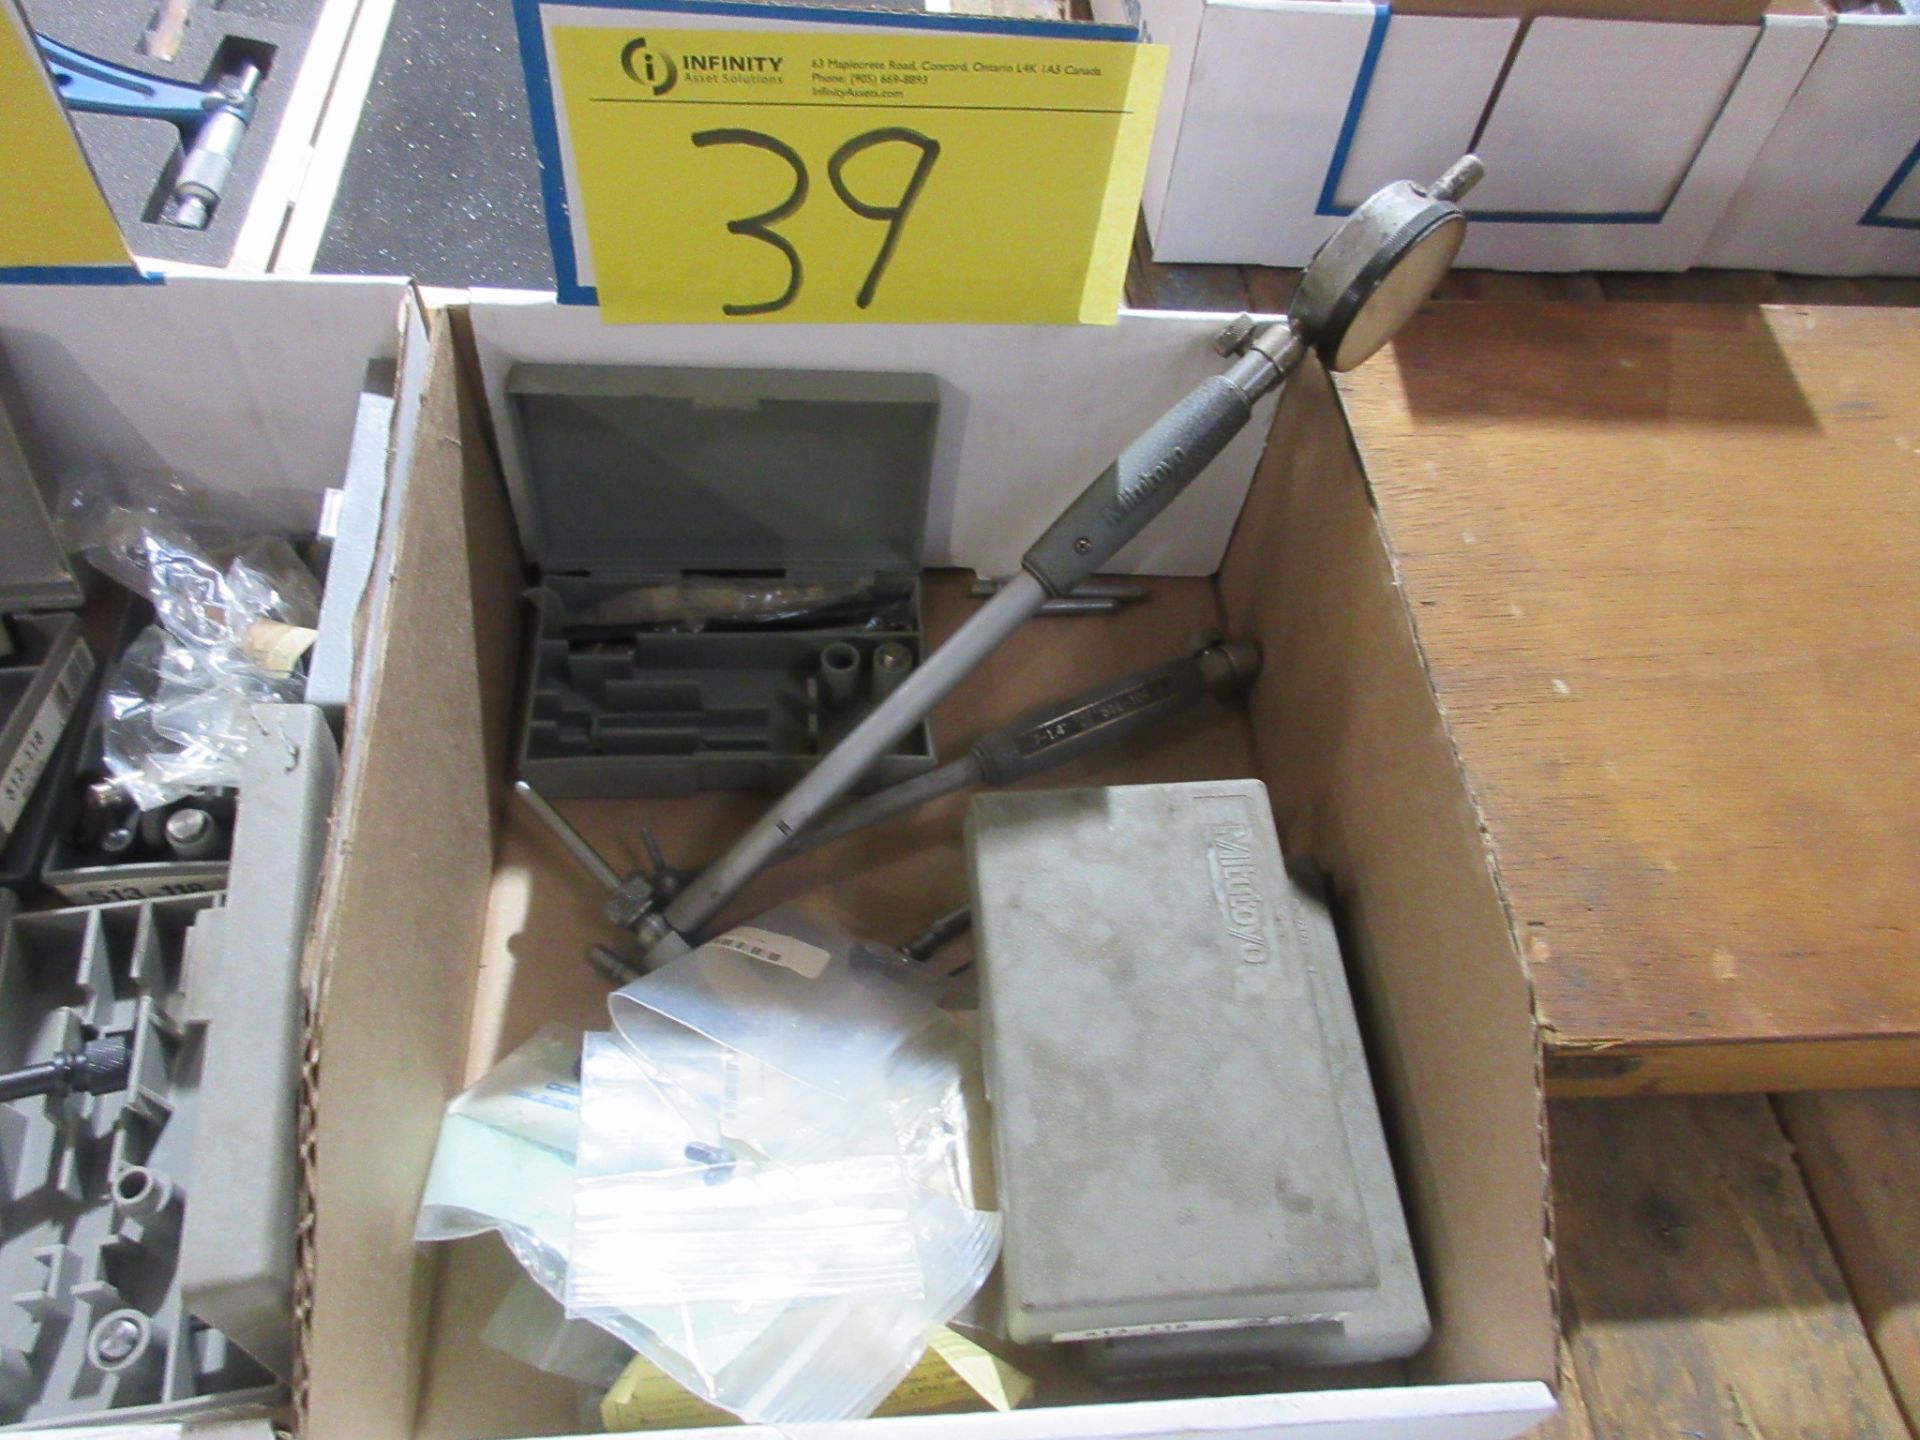 LOT OF (3) BOXES OF 1.4-2.5", .7-1.4" MITUTOYO HOLE GAUGE SETS, MITUTOYO PROBE, INDICATORS, MAG - Image 3 of 5